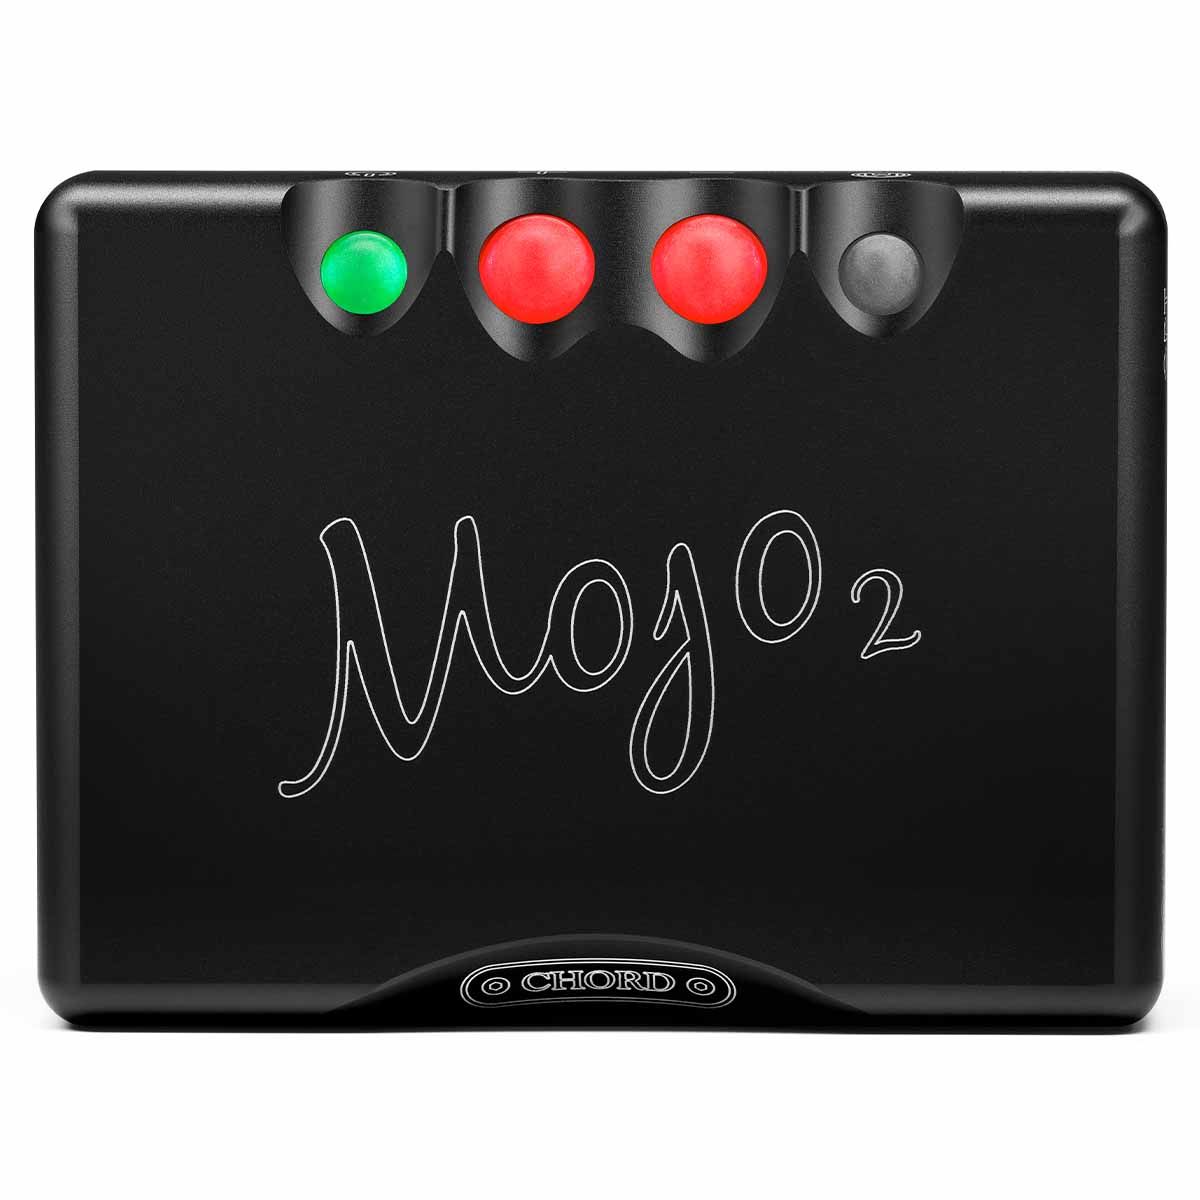 Chord Mojo 2 on white background shown from the top